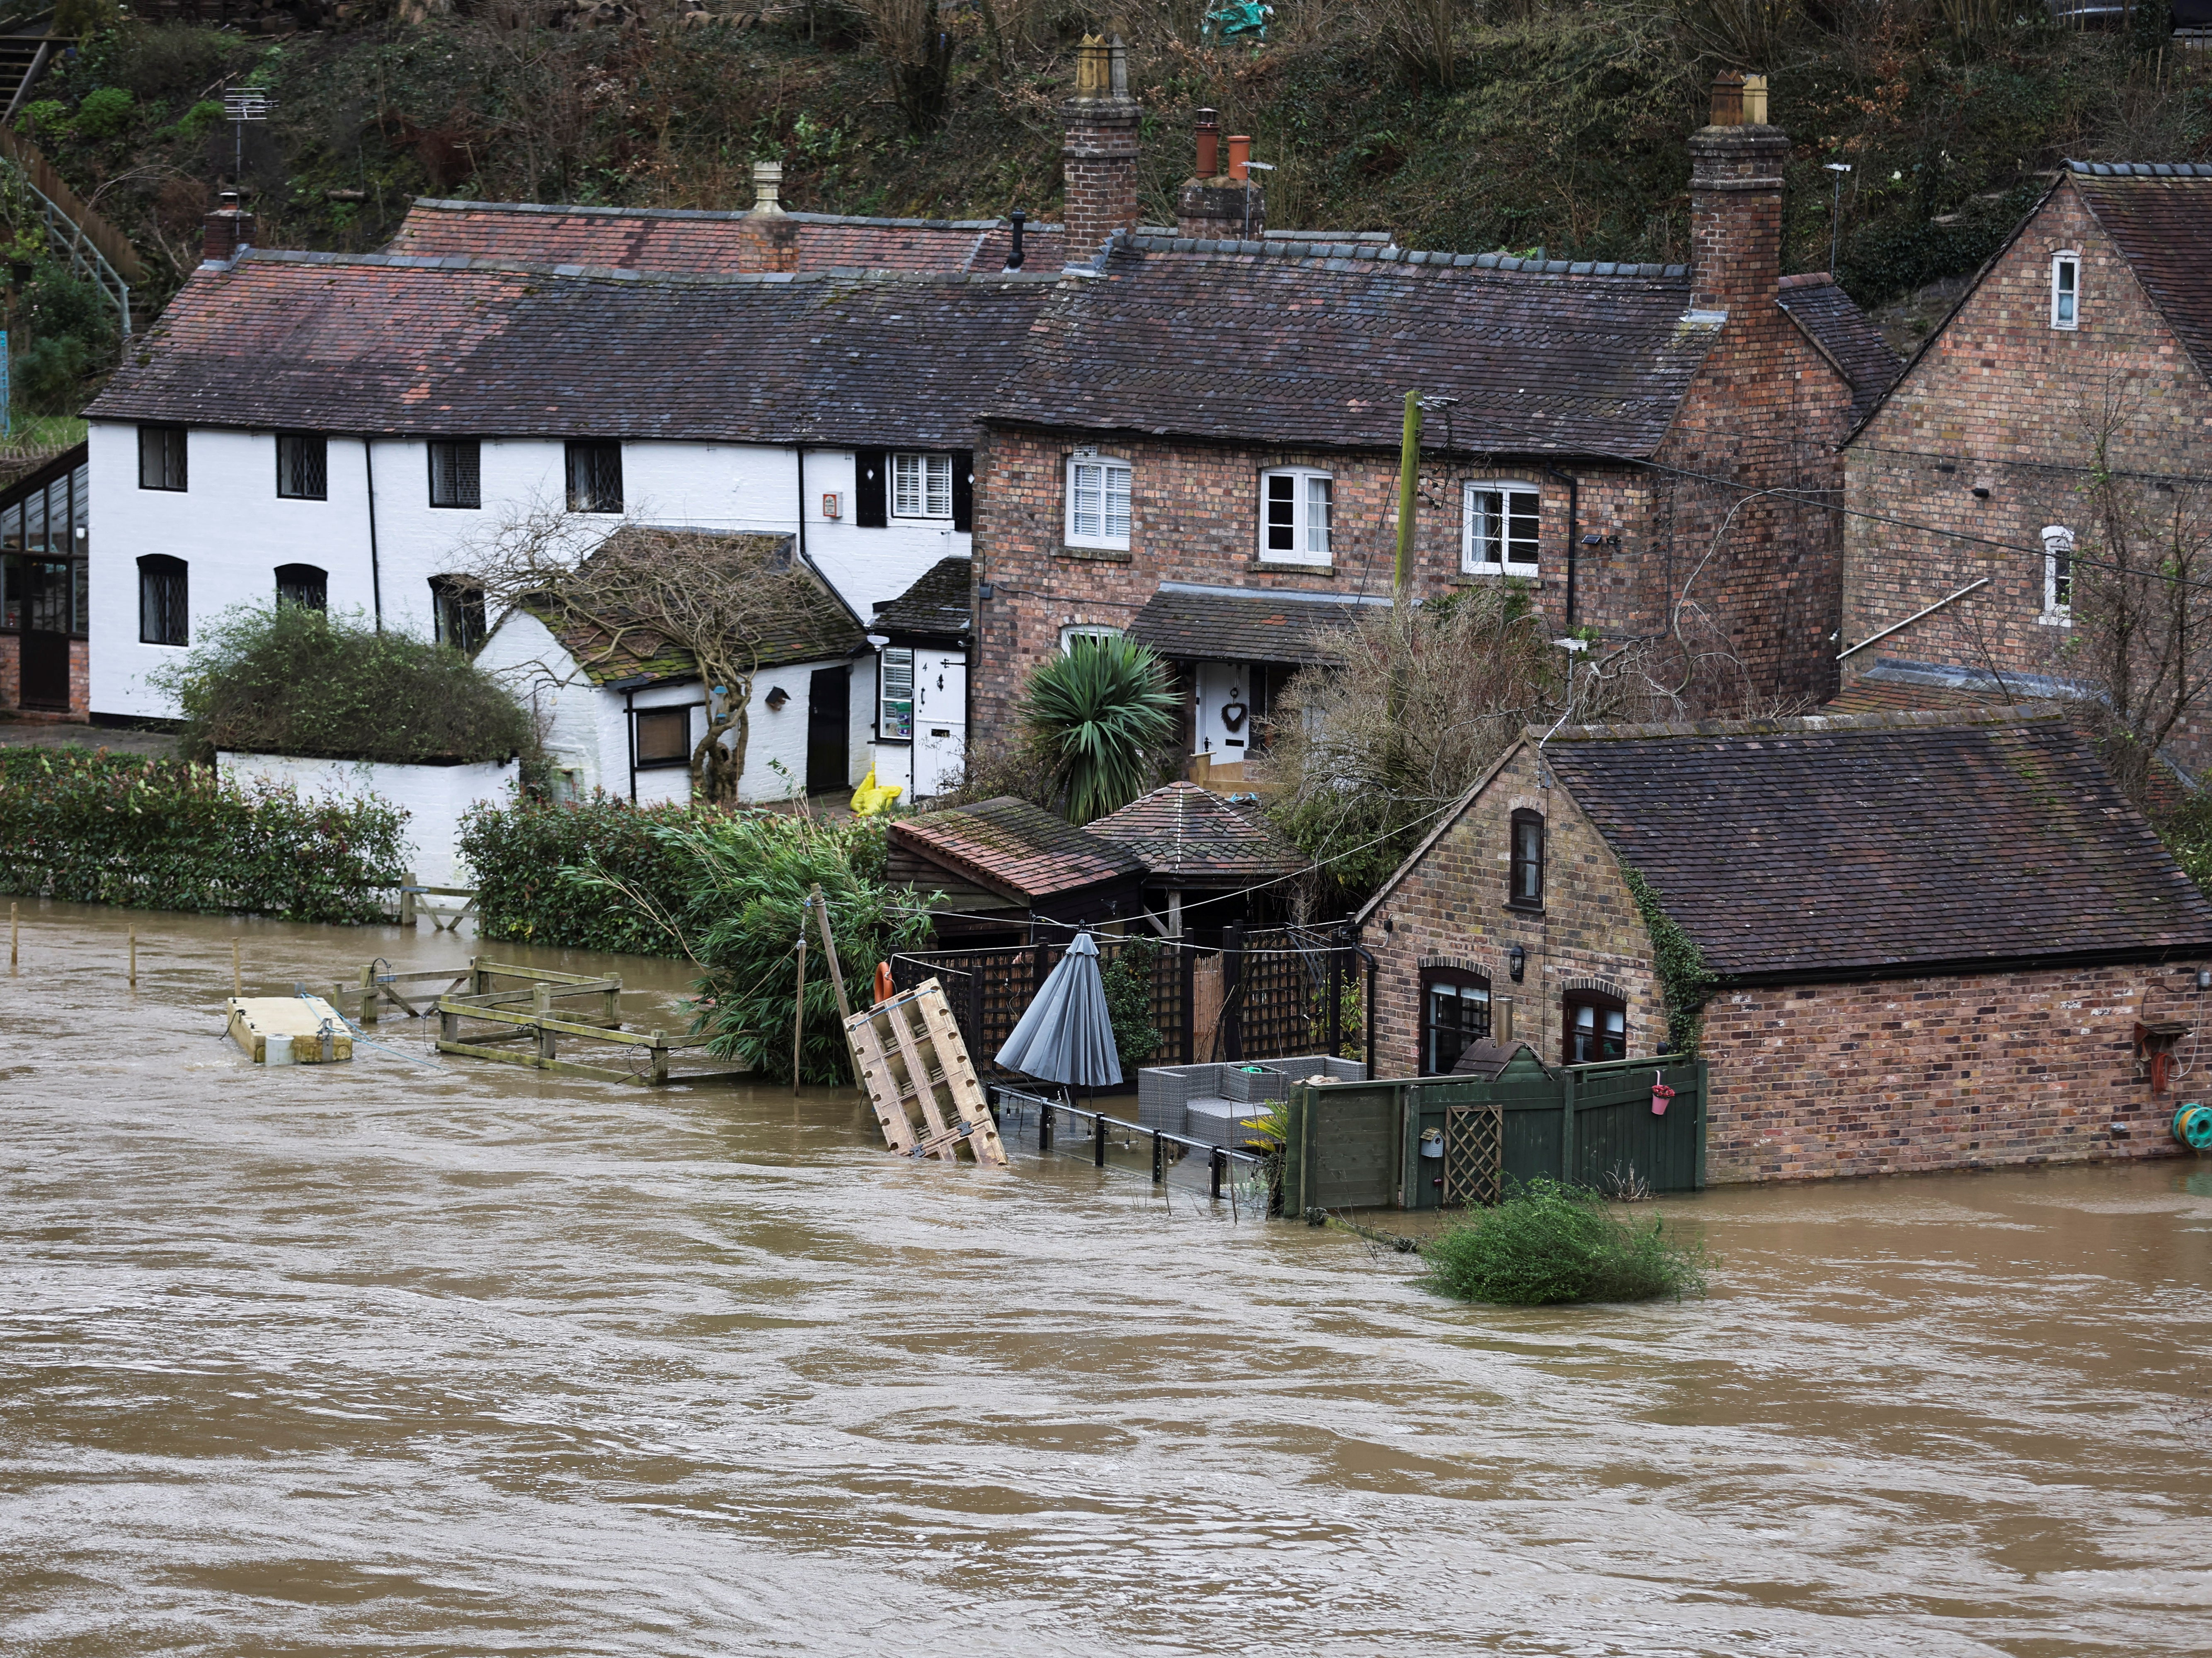 Houses are flooded after high water levels on the River Severn in Ironbridge during Storm Franklin